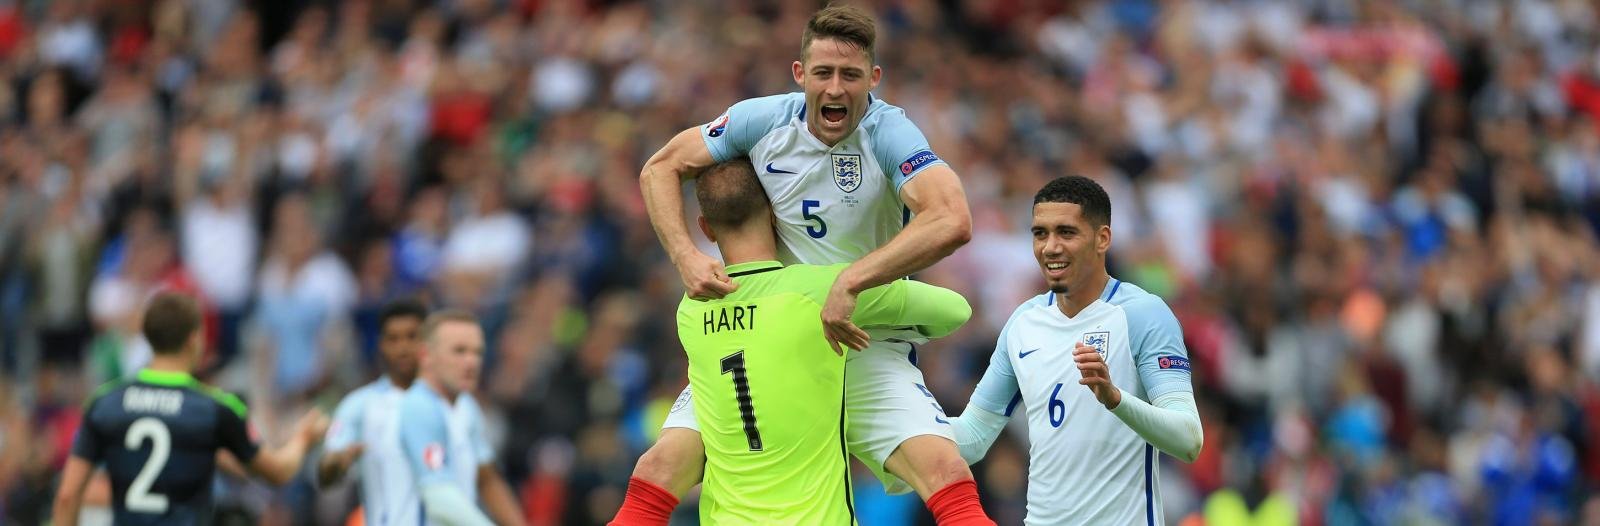 England vs Iceland: EURO 2016 Round of 16 Preview & Prediction